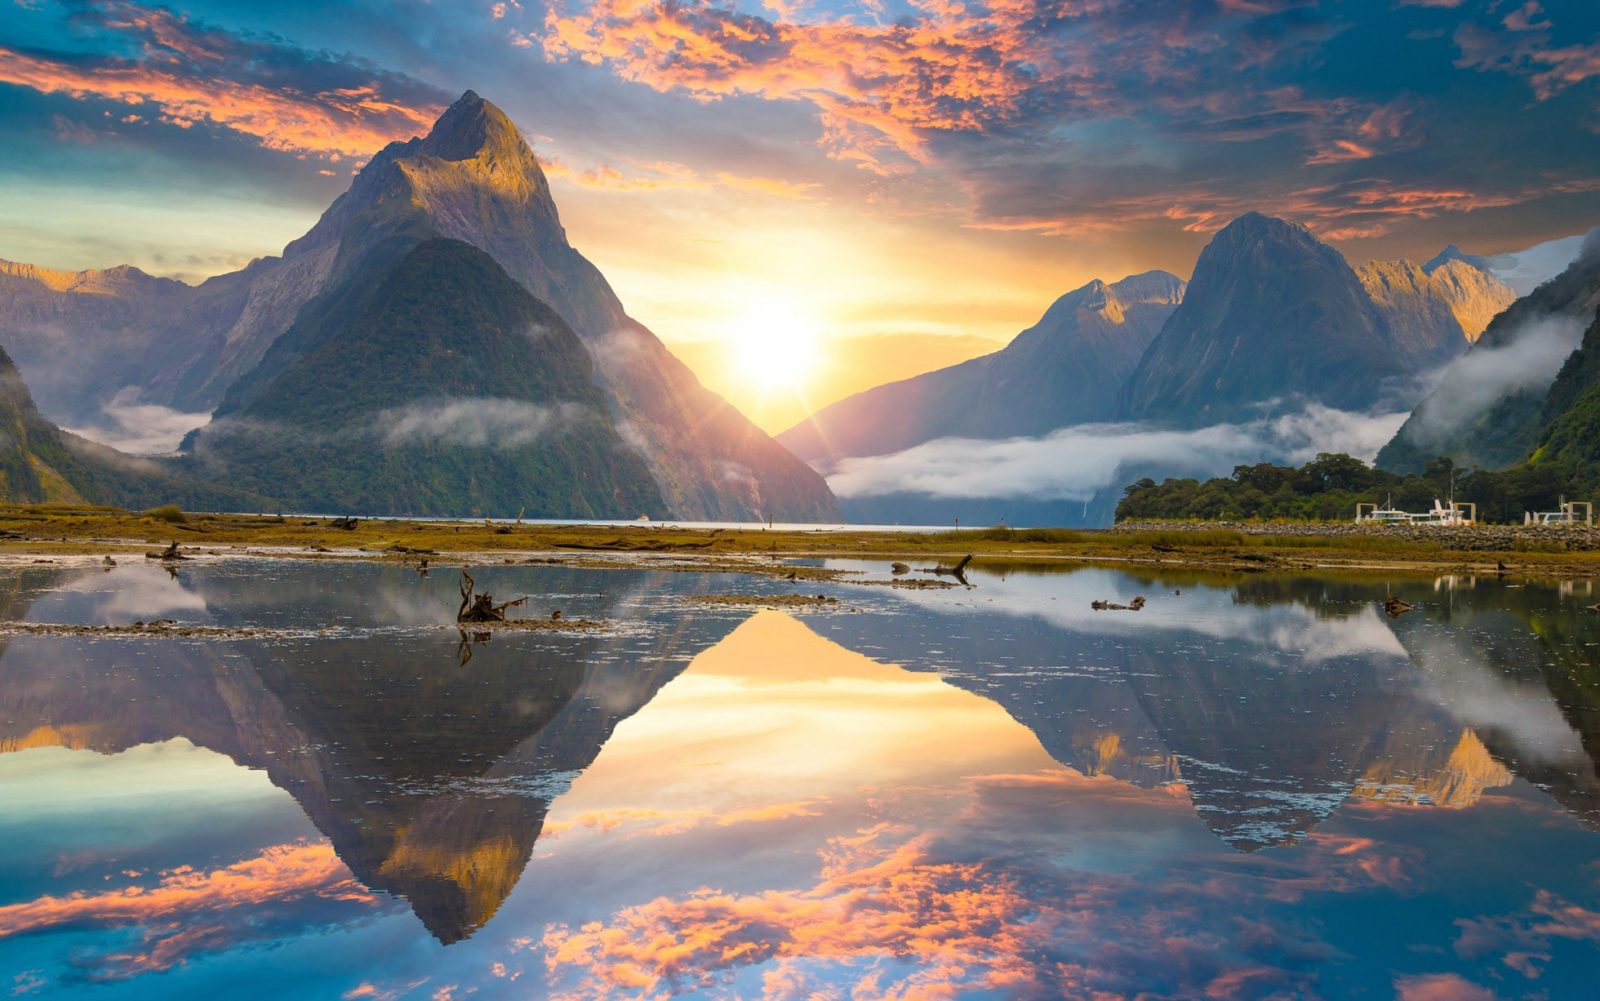 🚢 Journey Around the World in 24 Questions – How Well Can You Score? Milford Sound, New Zealand